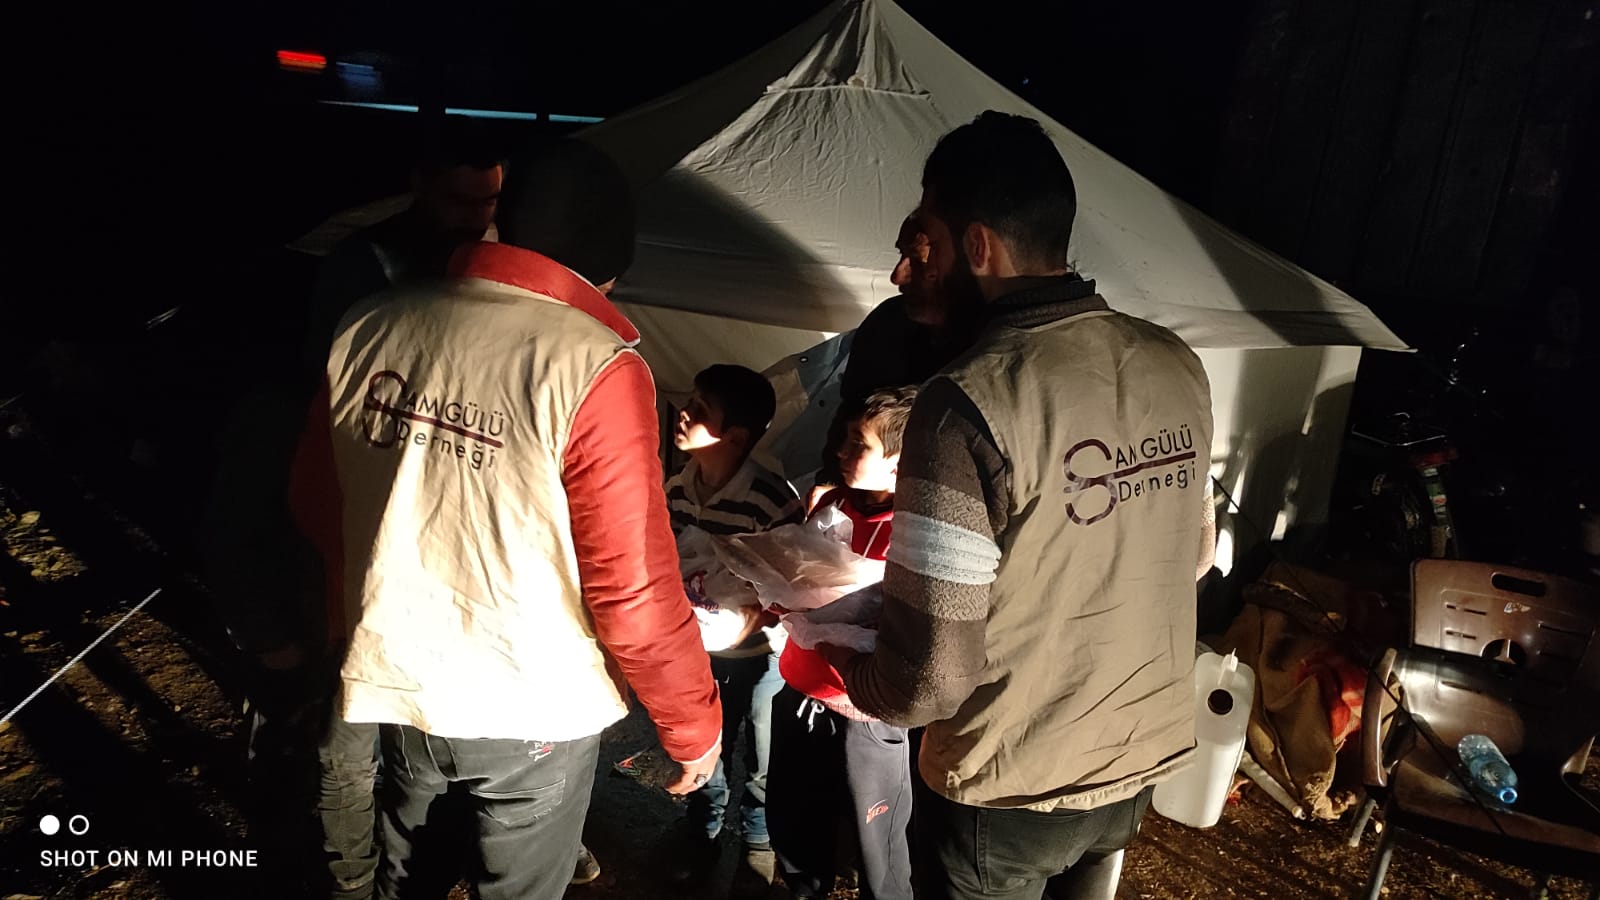 Humanity in Action: Providing Relief for Earthquake Victims in Syria